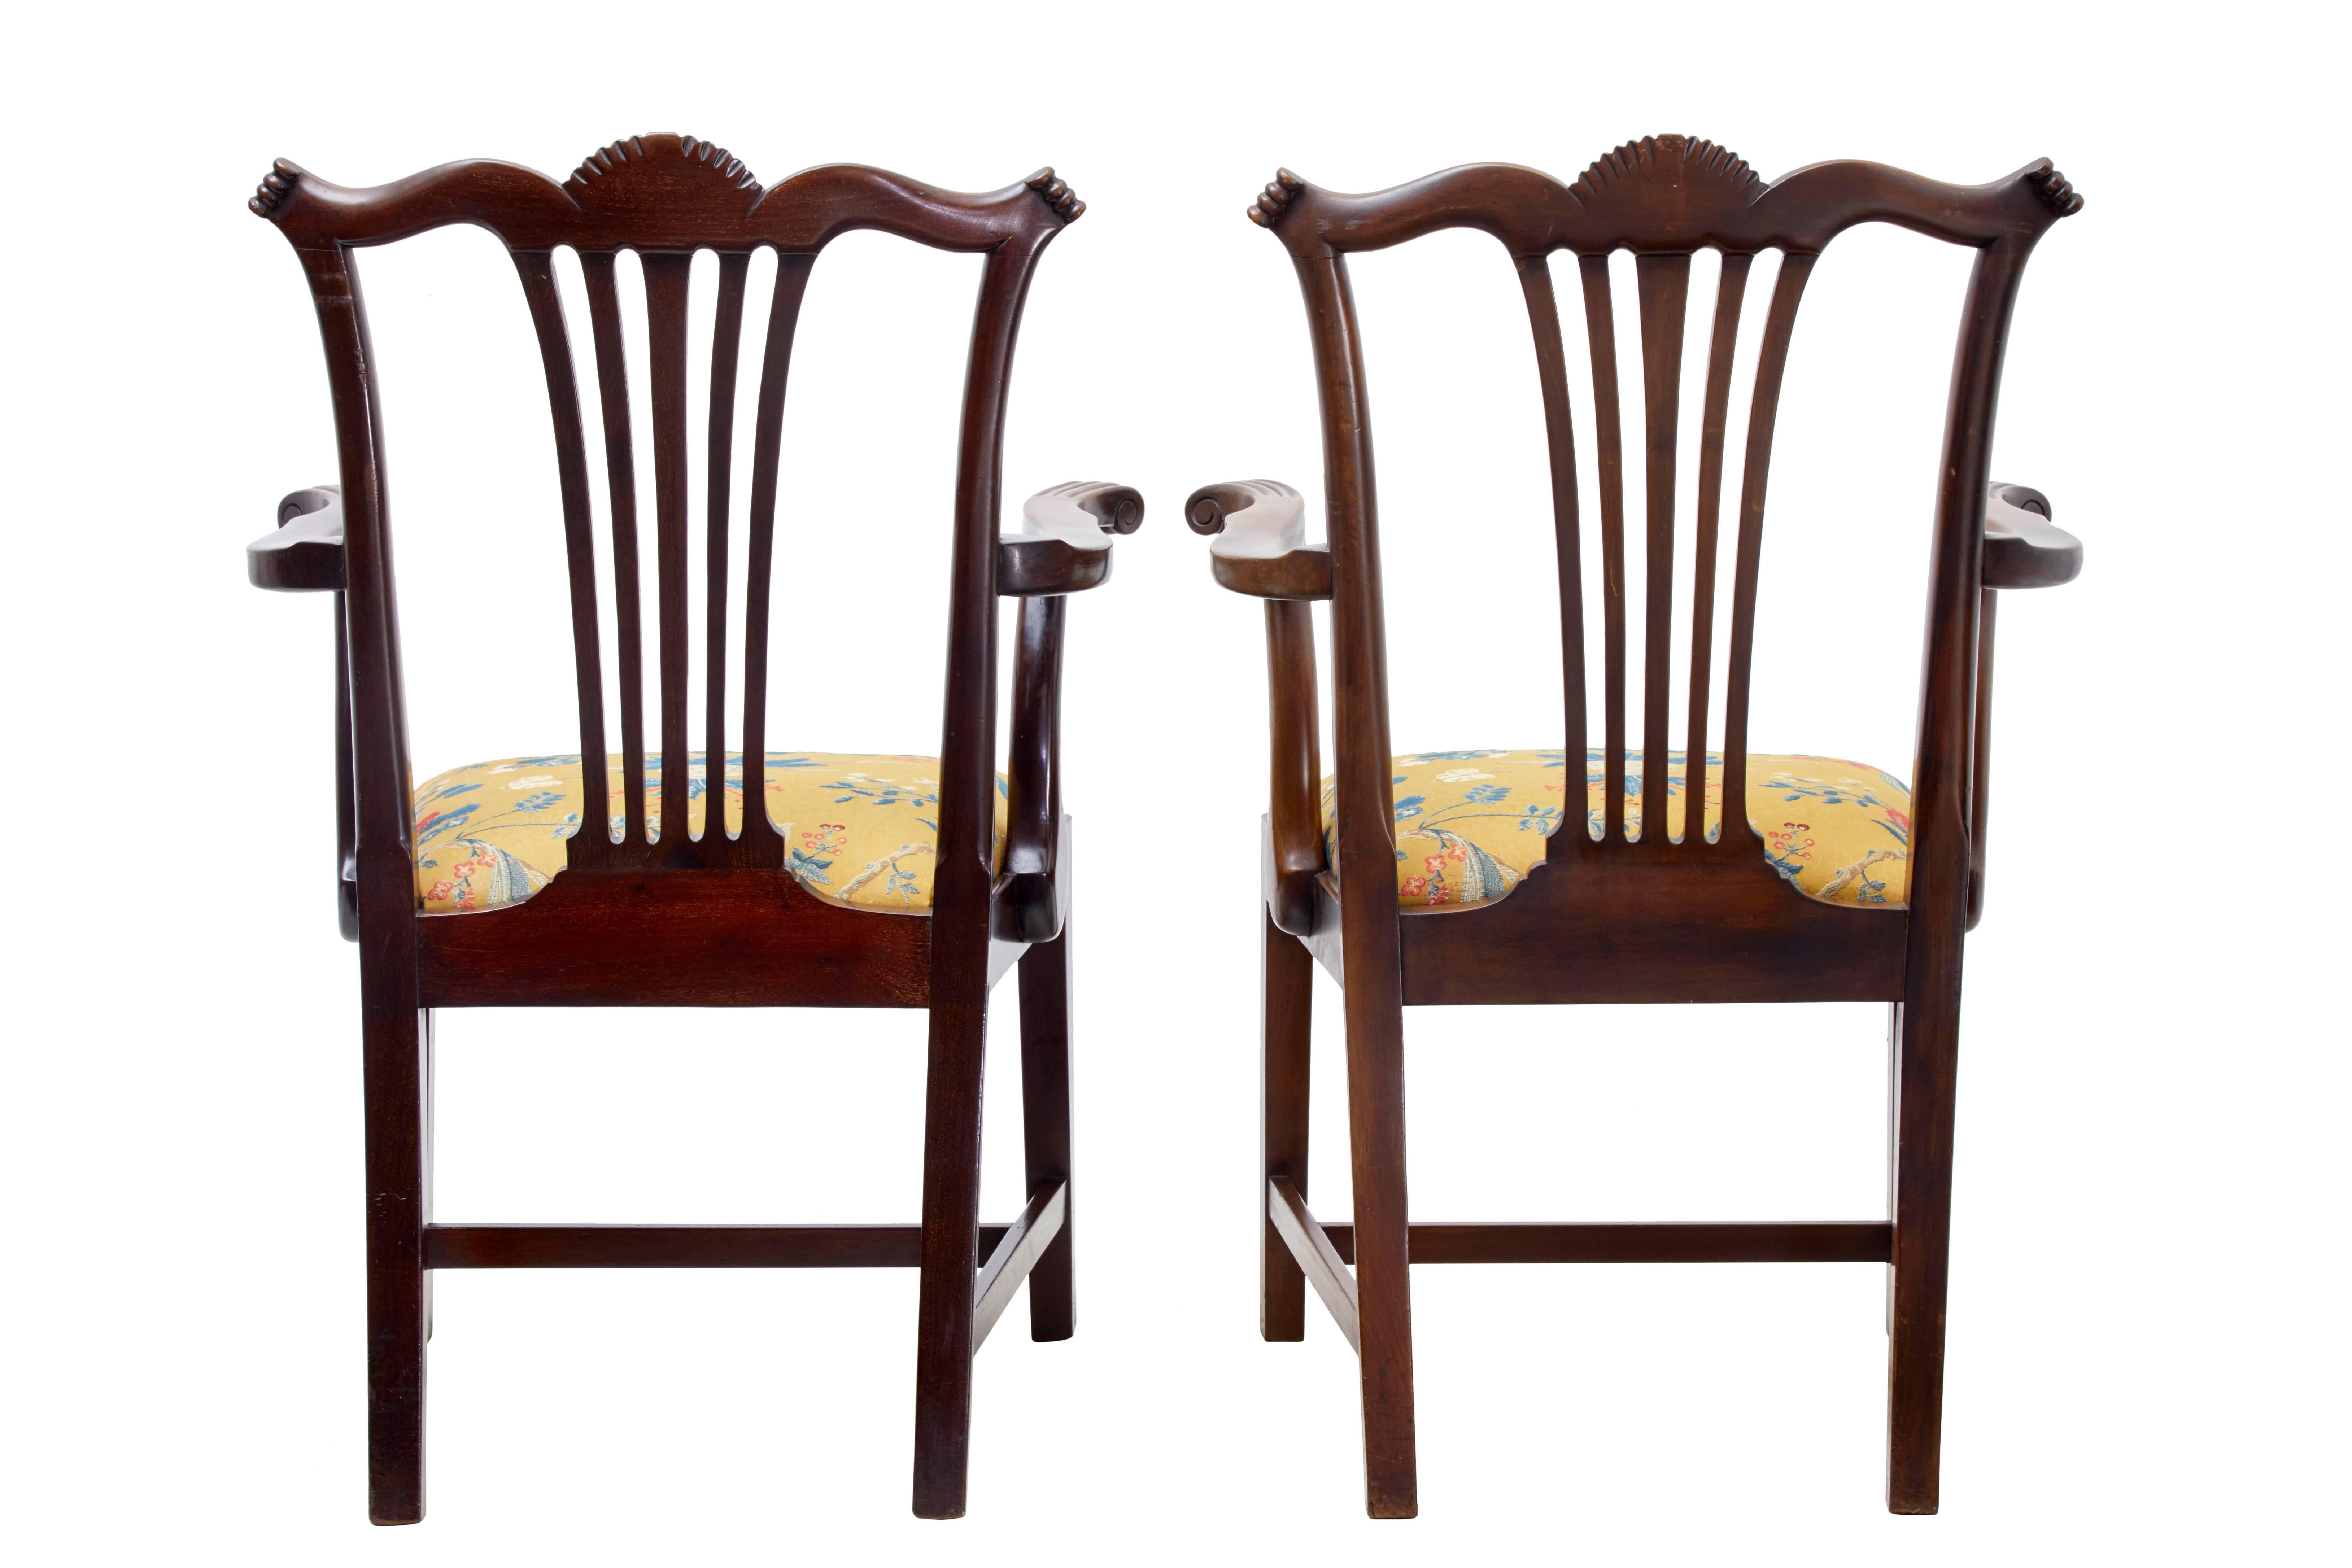 British Pair of 19th Century Chippendale Revival Mahogany Armchairs